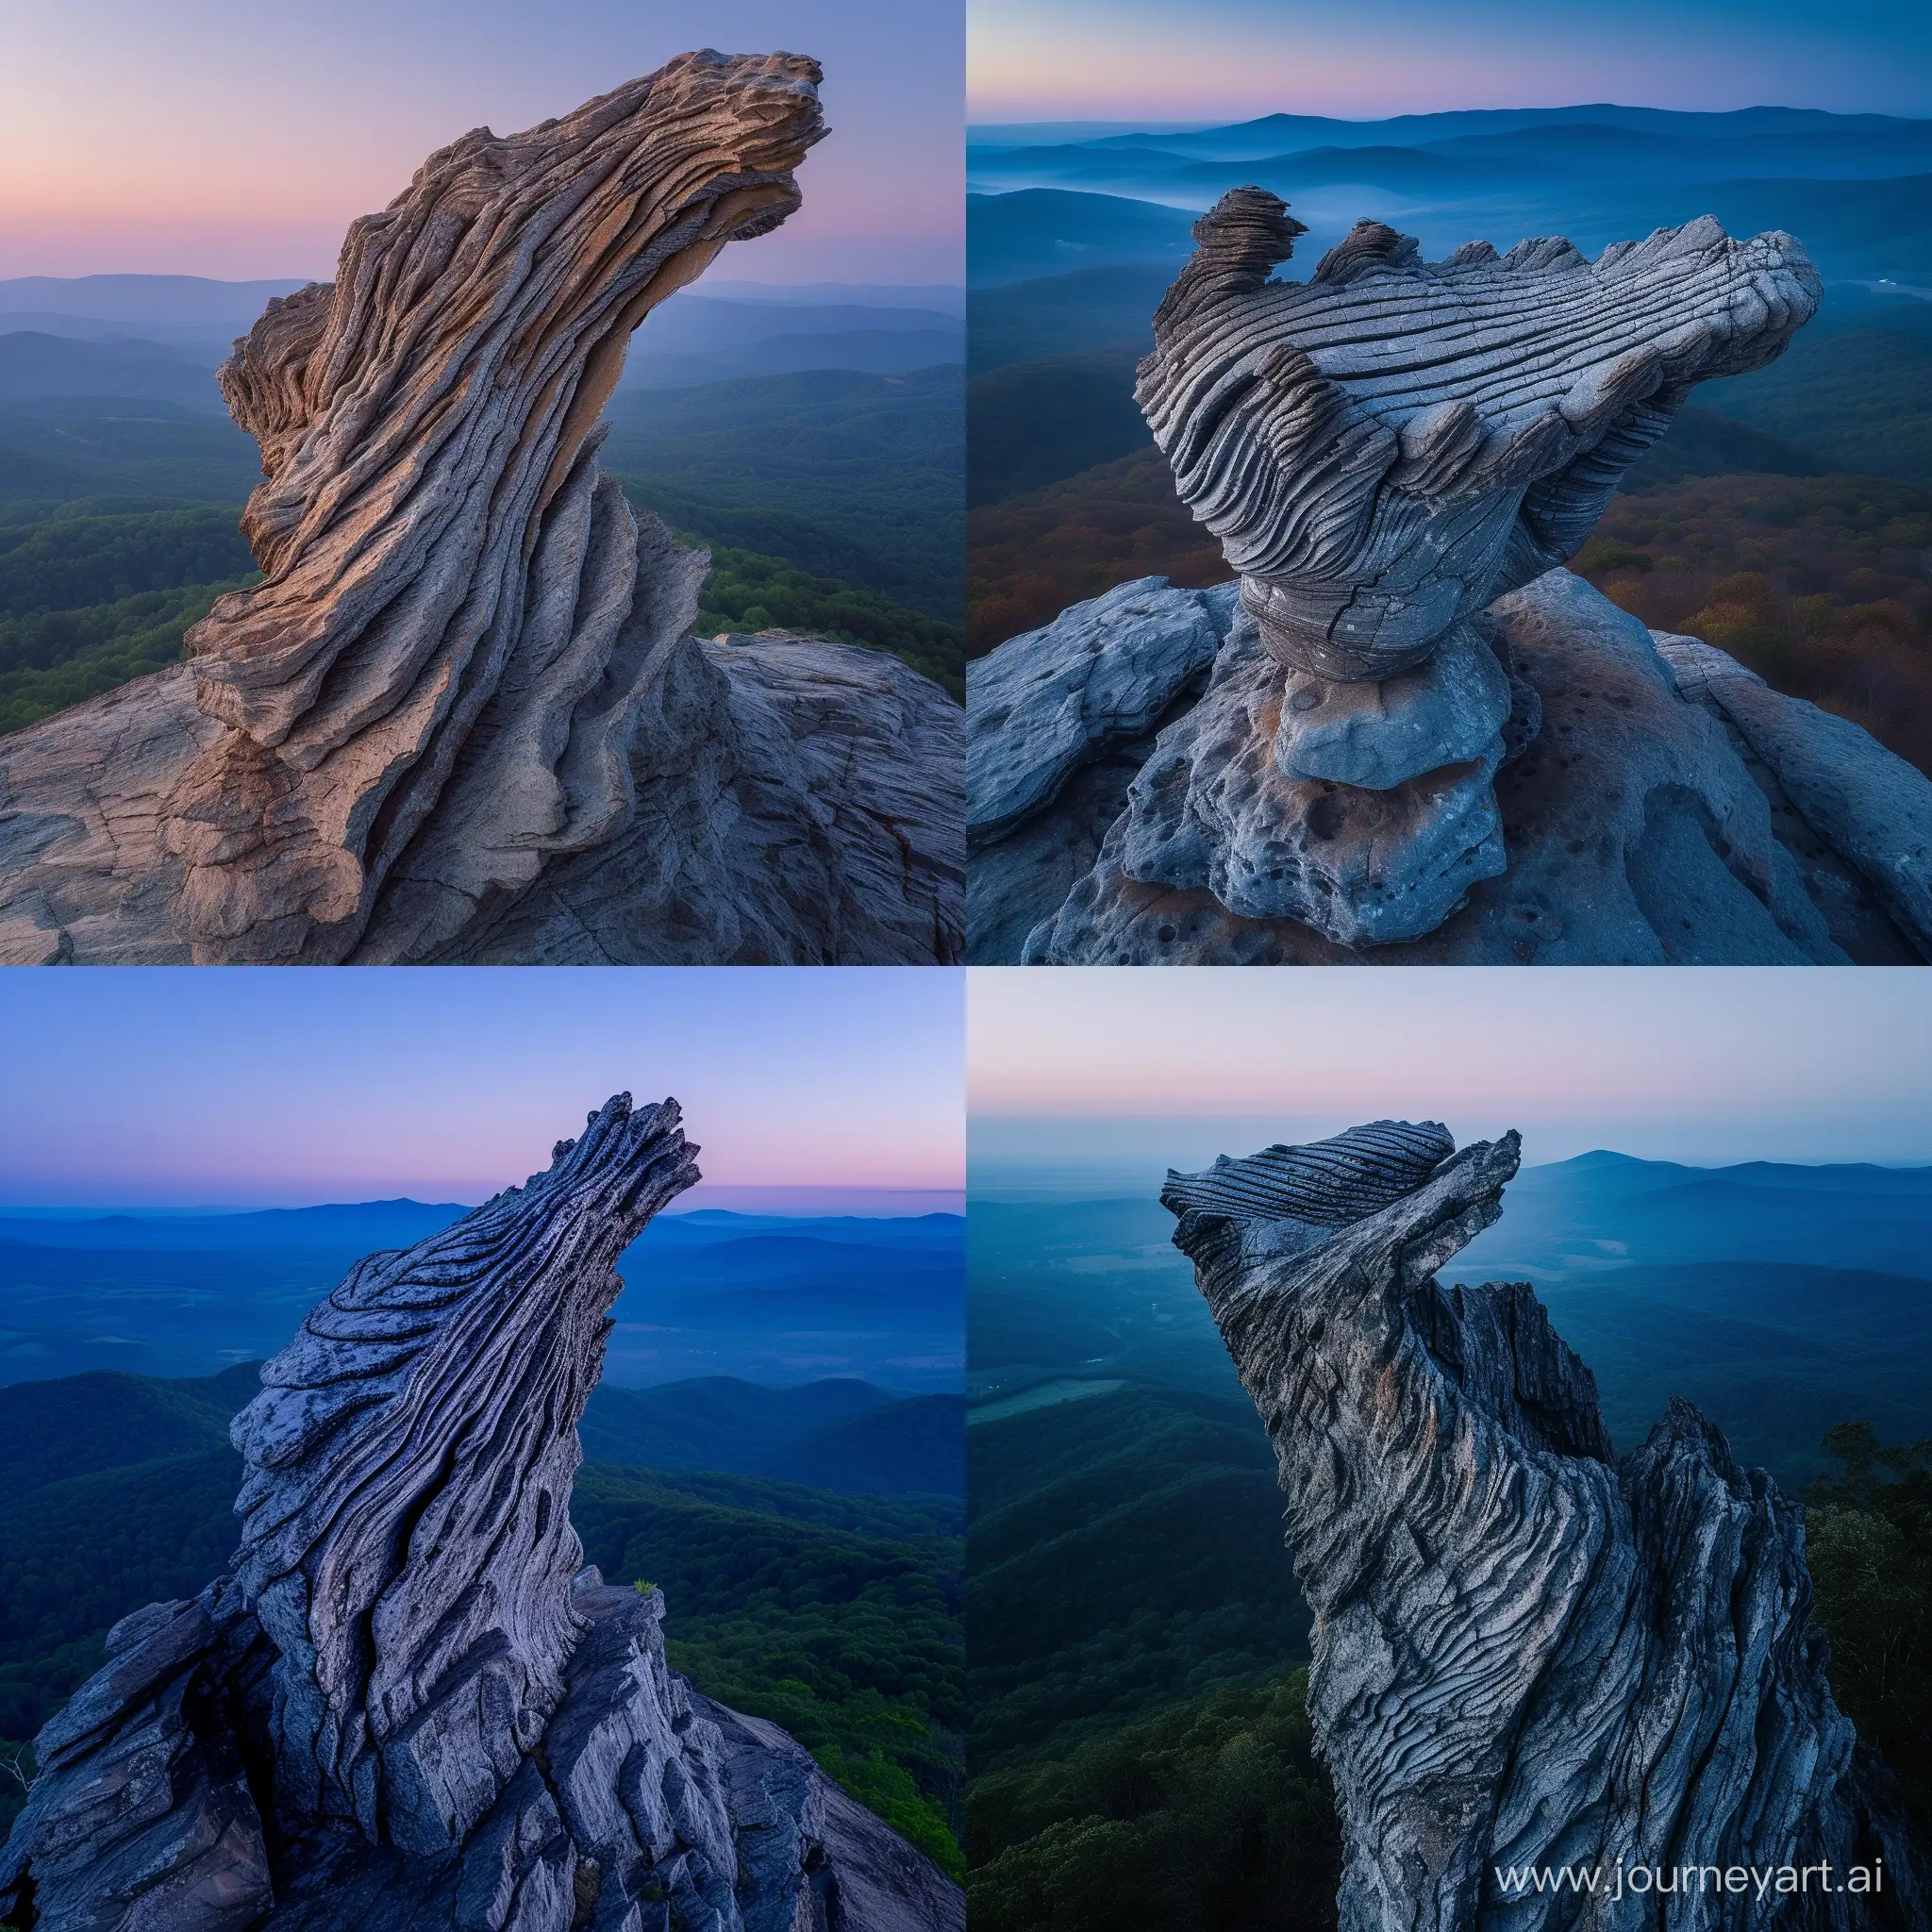 photo of humpback rock outcrop, outcrop looks exactly like a breaching humpback whale, head shape and front fin shape visible with striations on the ventral pleats, virginia, rolling blue ridge mountains in the background fading into deep blue, drone photography looking at the outcrop, morning, crisp, award winning landscape, sunrise, beautiful, gently lit by the sunrise